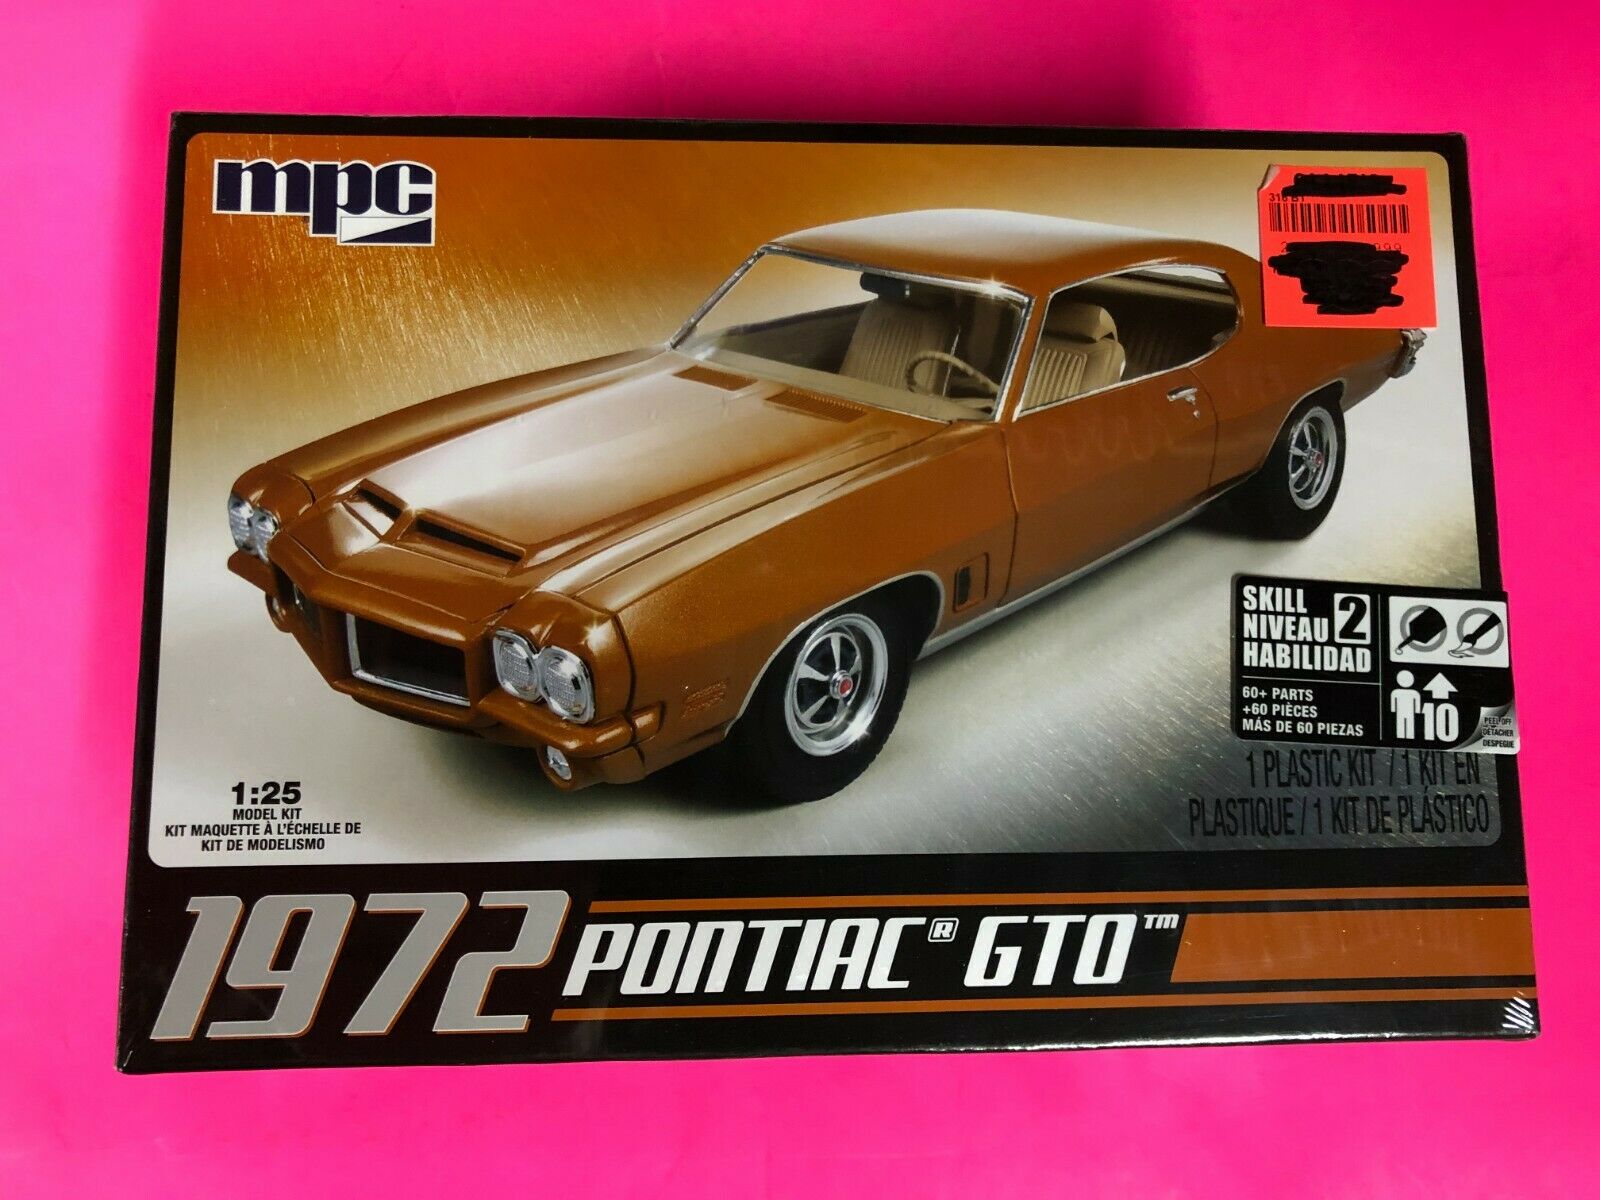 1972 Pontiac Gto Muscle Car Model Kit Amt 1/25 Scale New Sealed Look!!